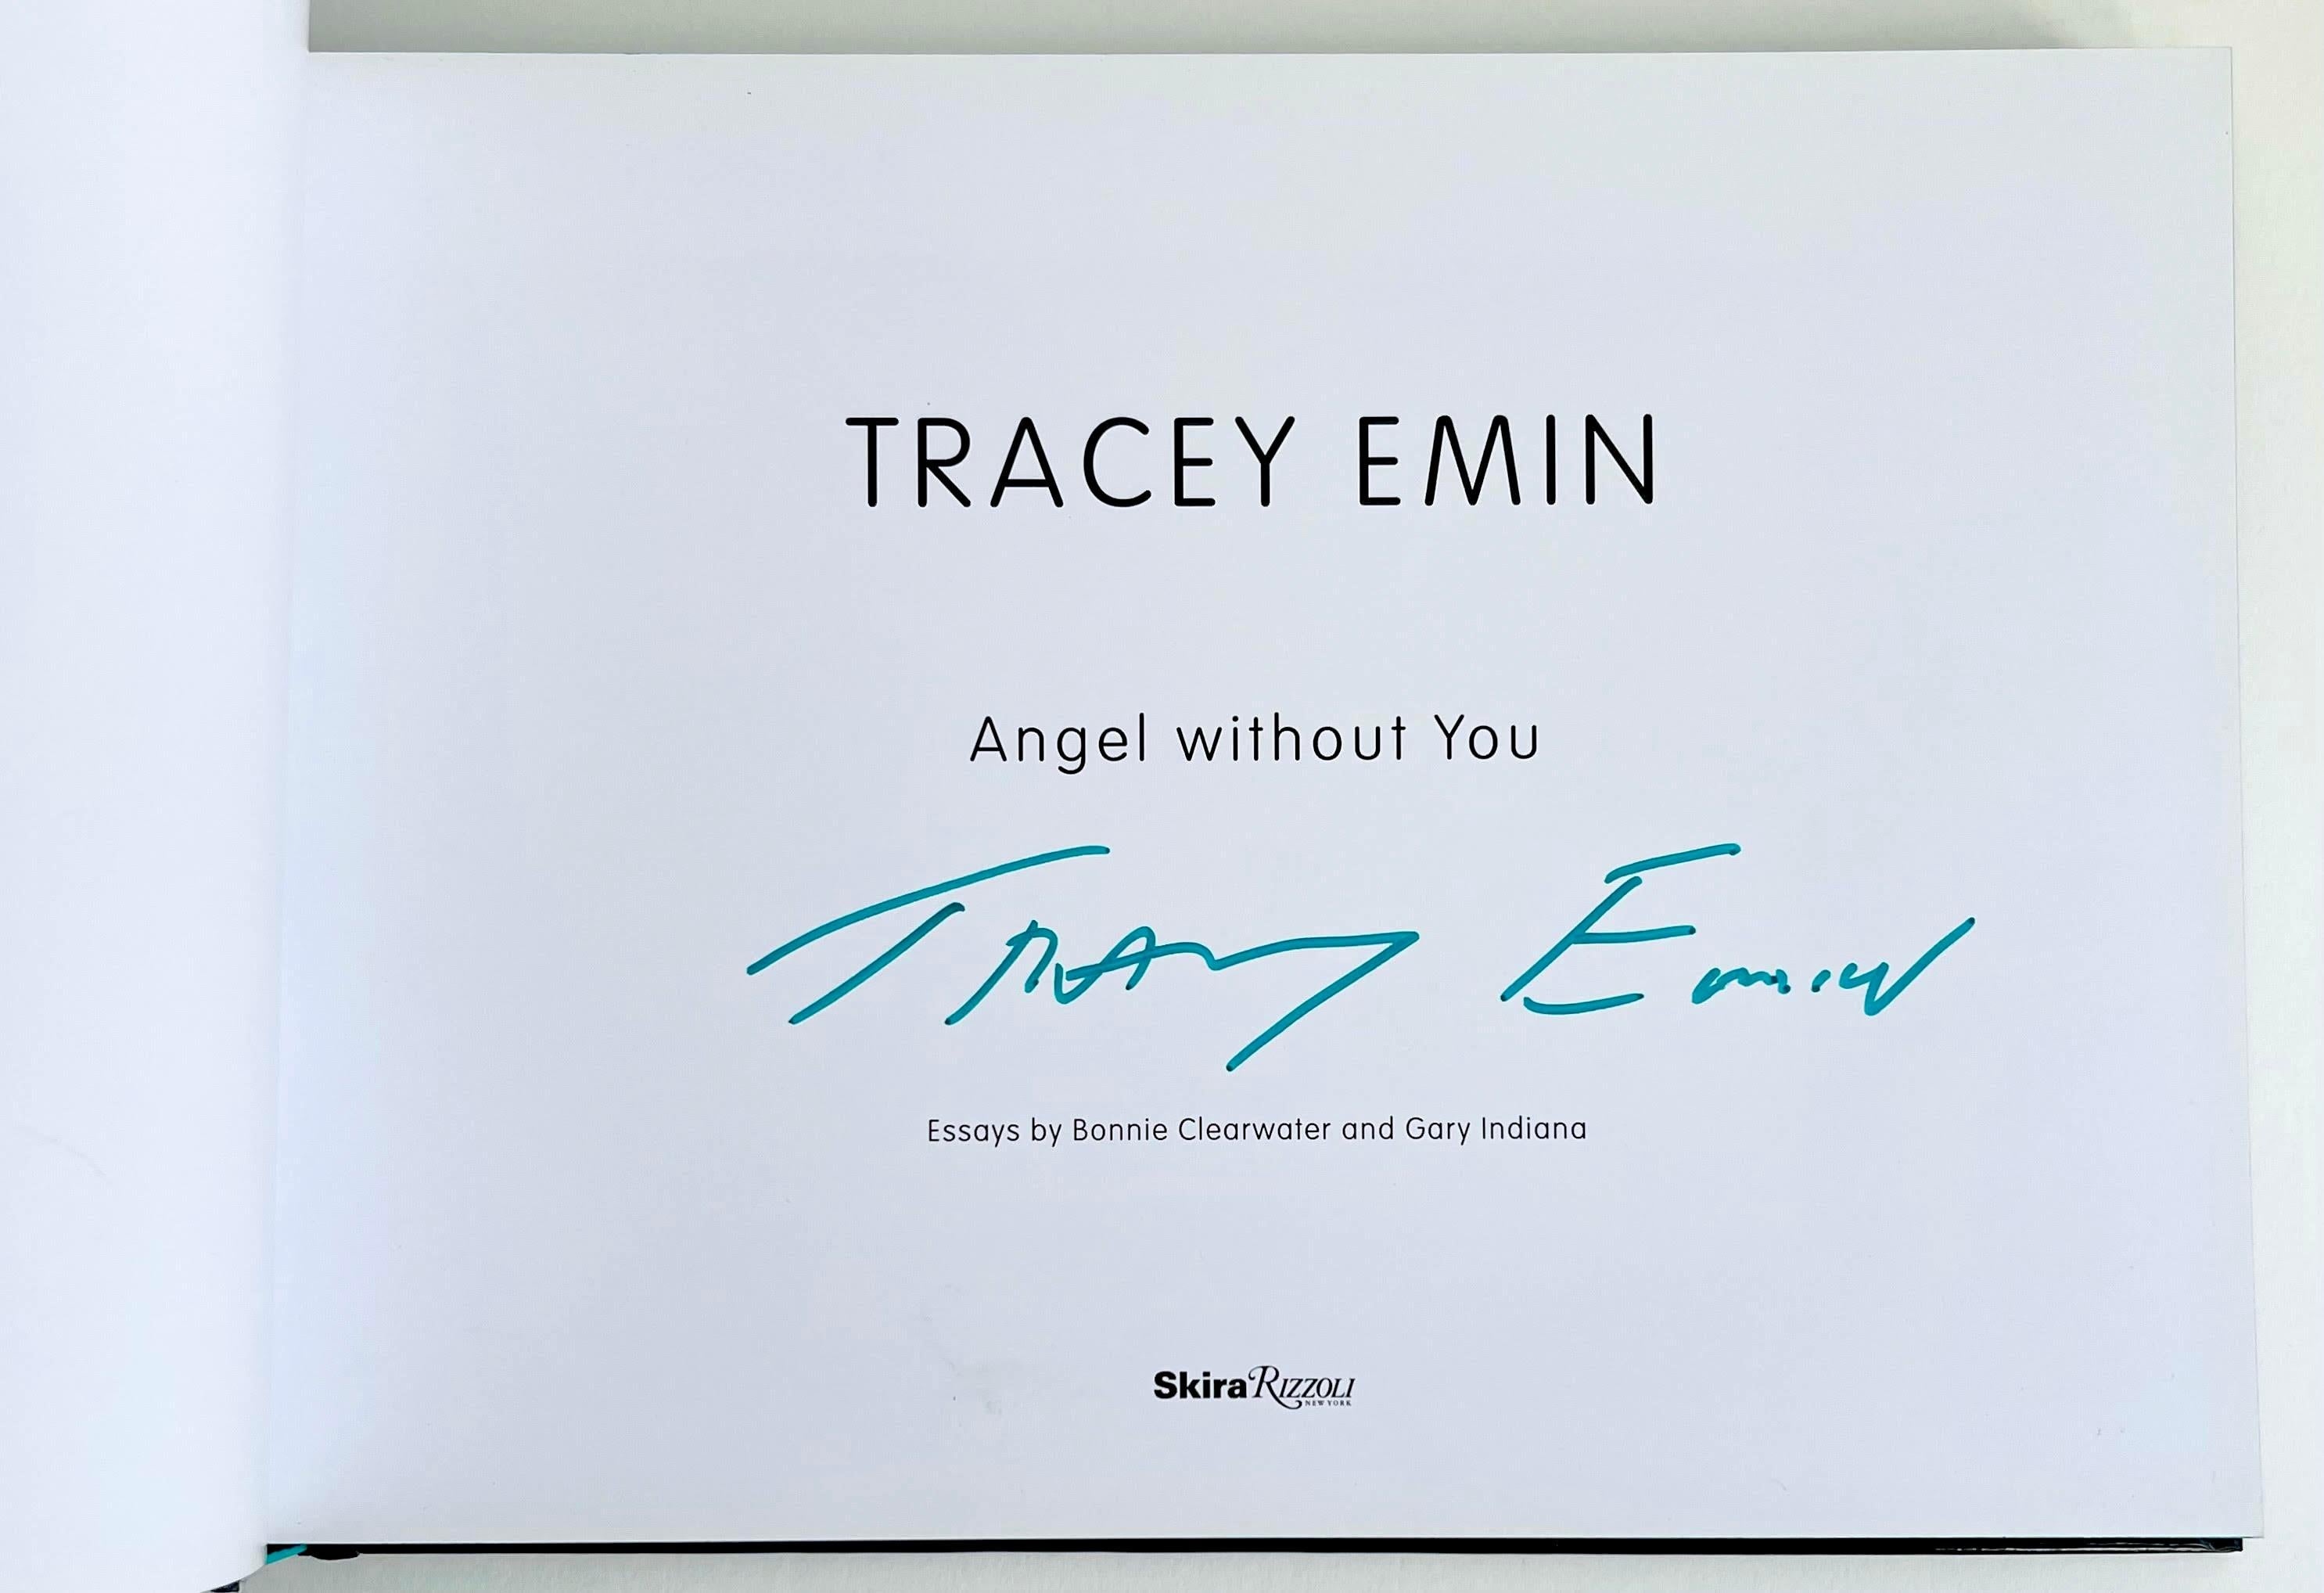 Tracey Emin
Angel Without You monograph (Hand signed by Tracey Emin), 2013
Hardback monograph with illustrated boards (hand signed by Tracey Emin)
Boldly signed in blue ink by Tracey Emin on the title page
8 1/2 × 11 1/4 × 1 inch
This hardback